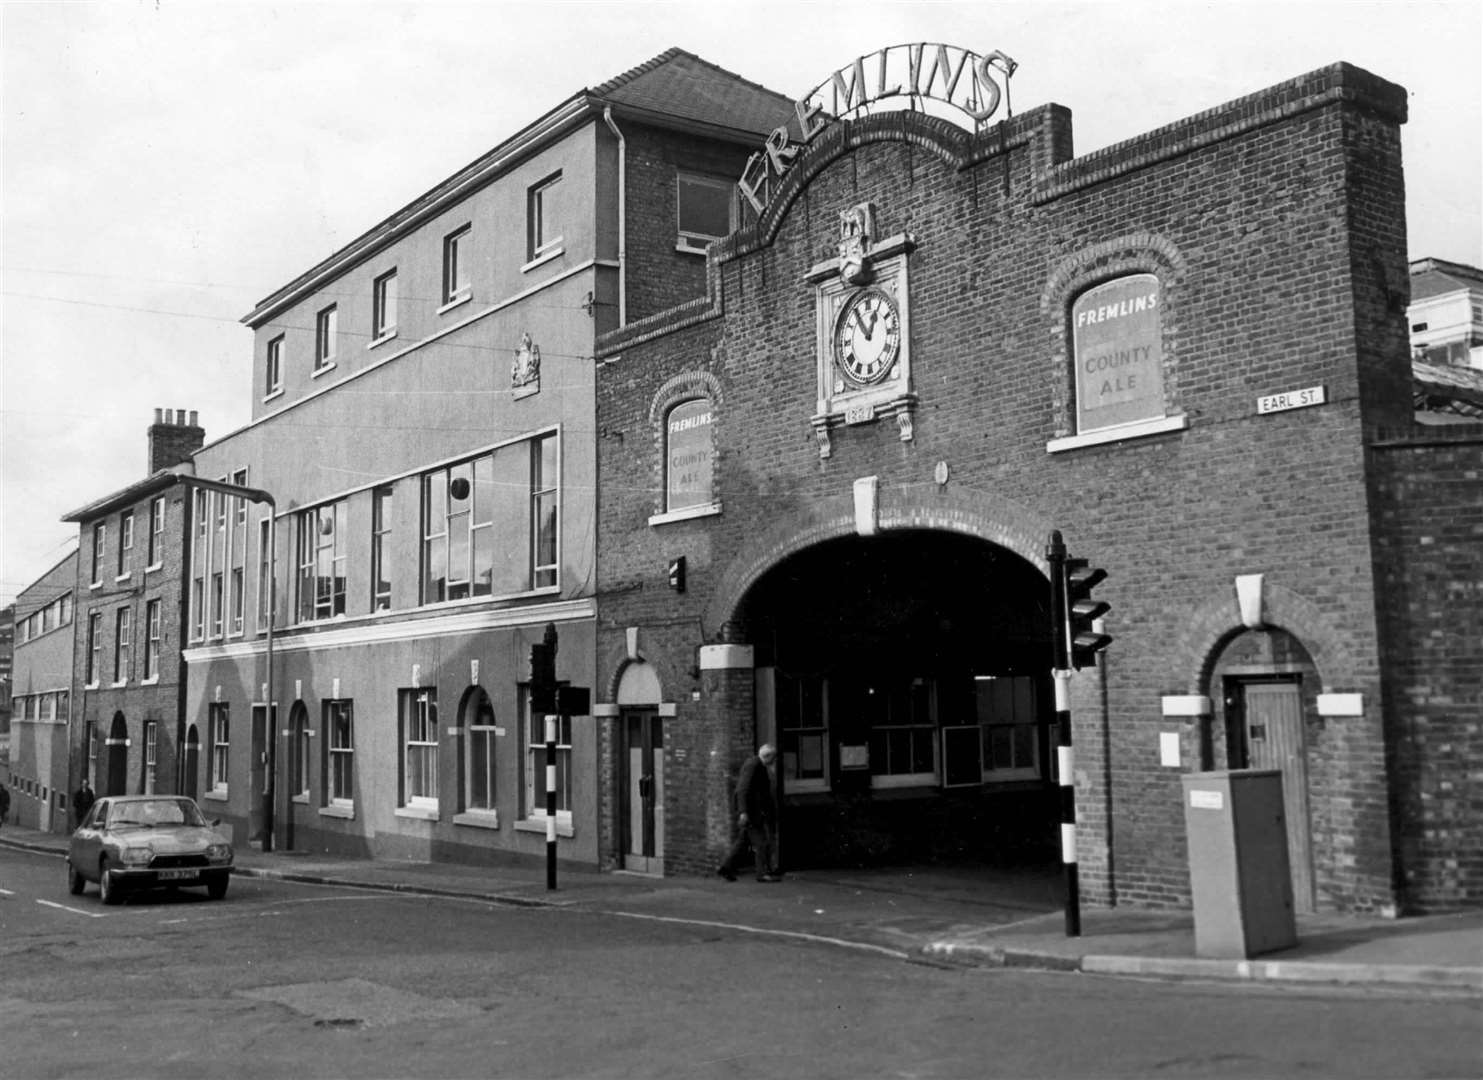 Fremlin’s Brewery at Maidstone in January 1976